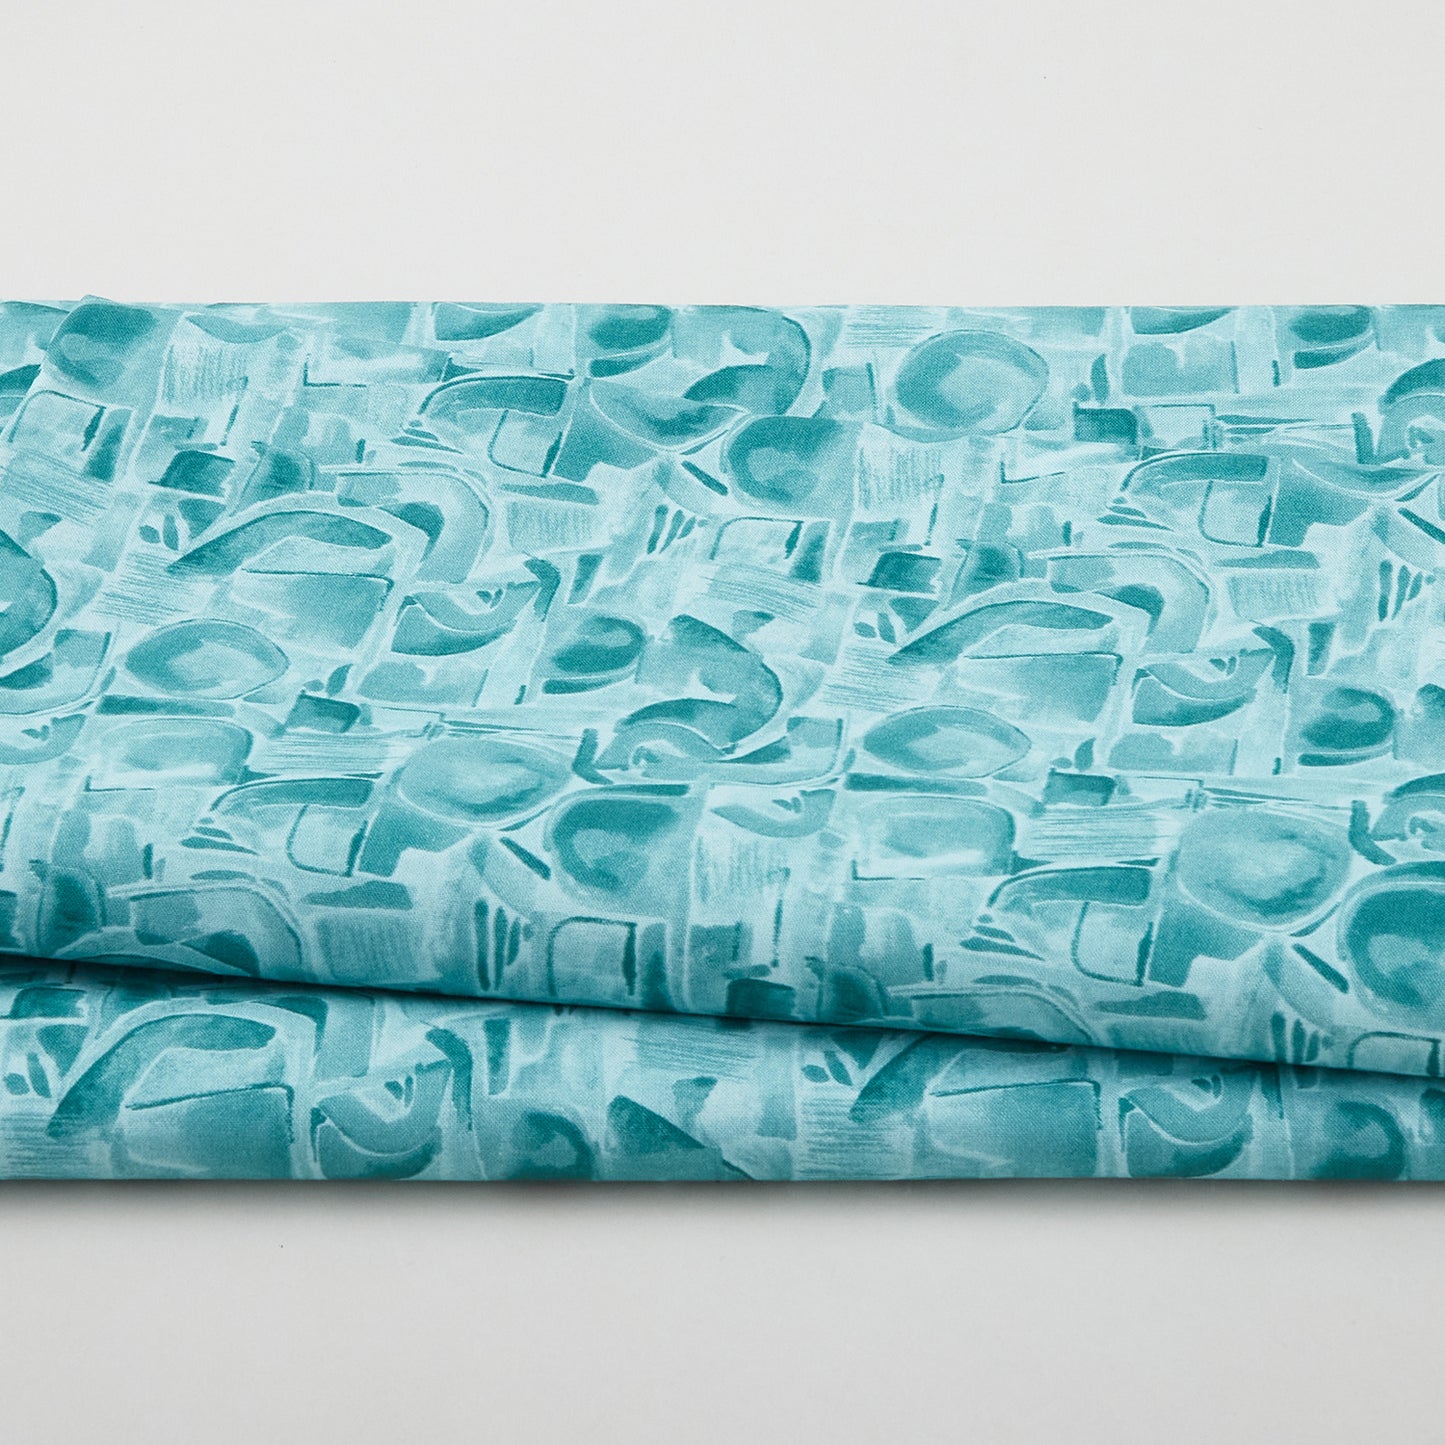 Spectral - Abstract Shapes Aqua 118" Wide 3 Yard Cut Primary Image